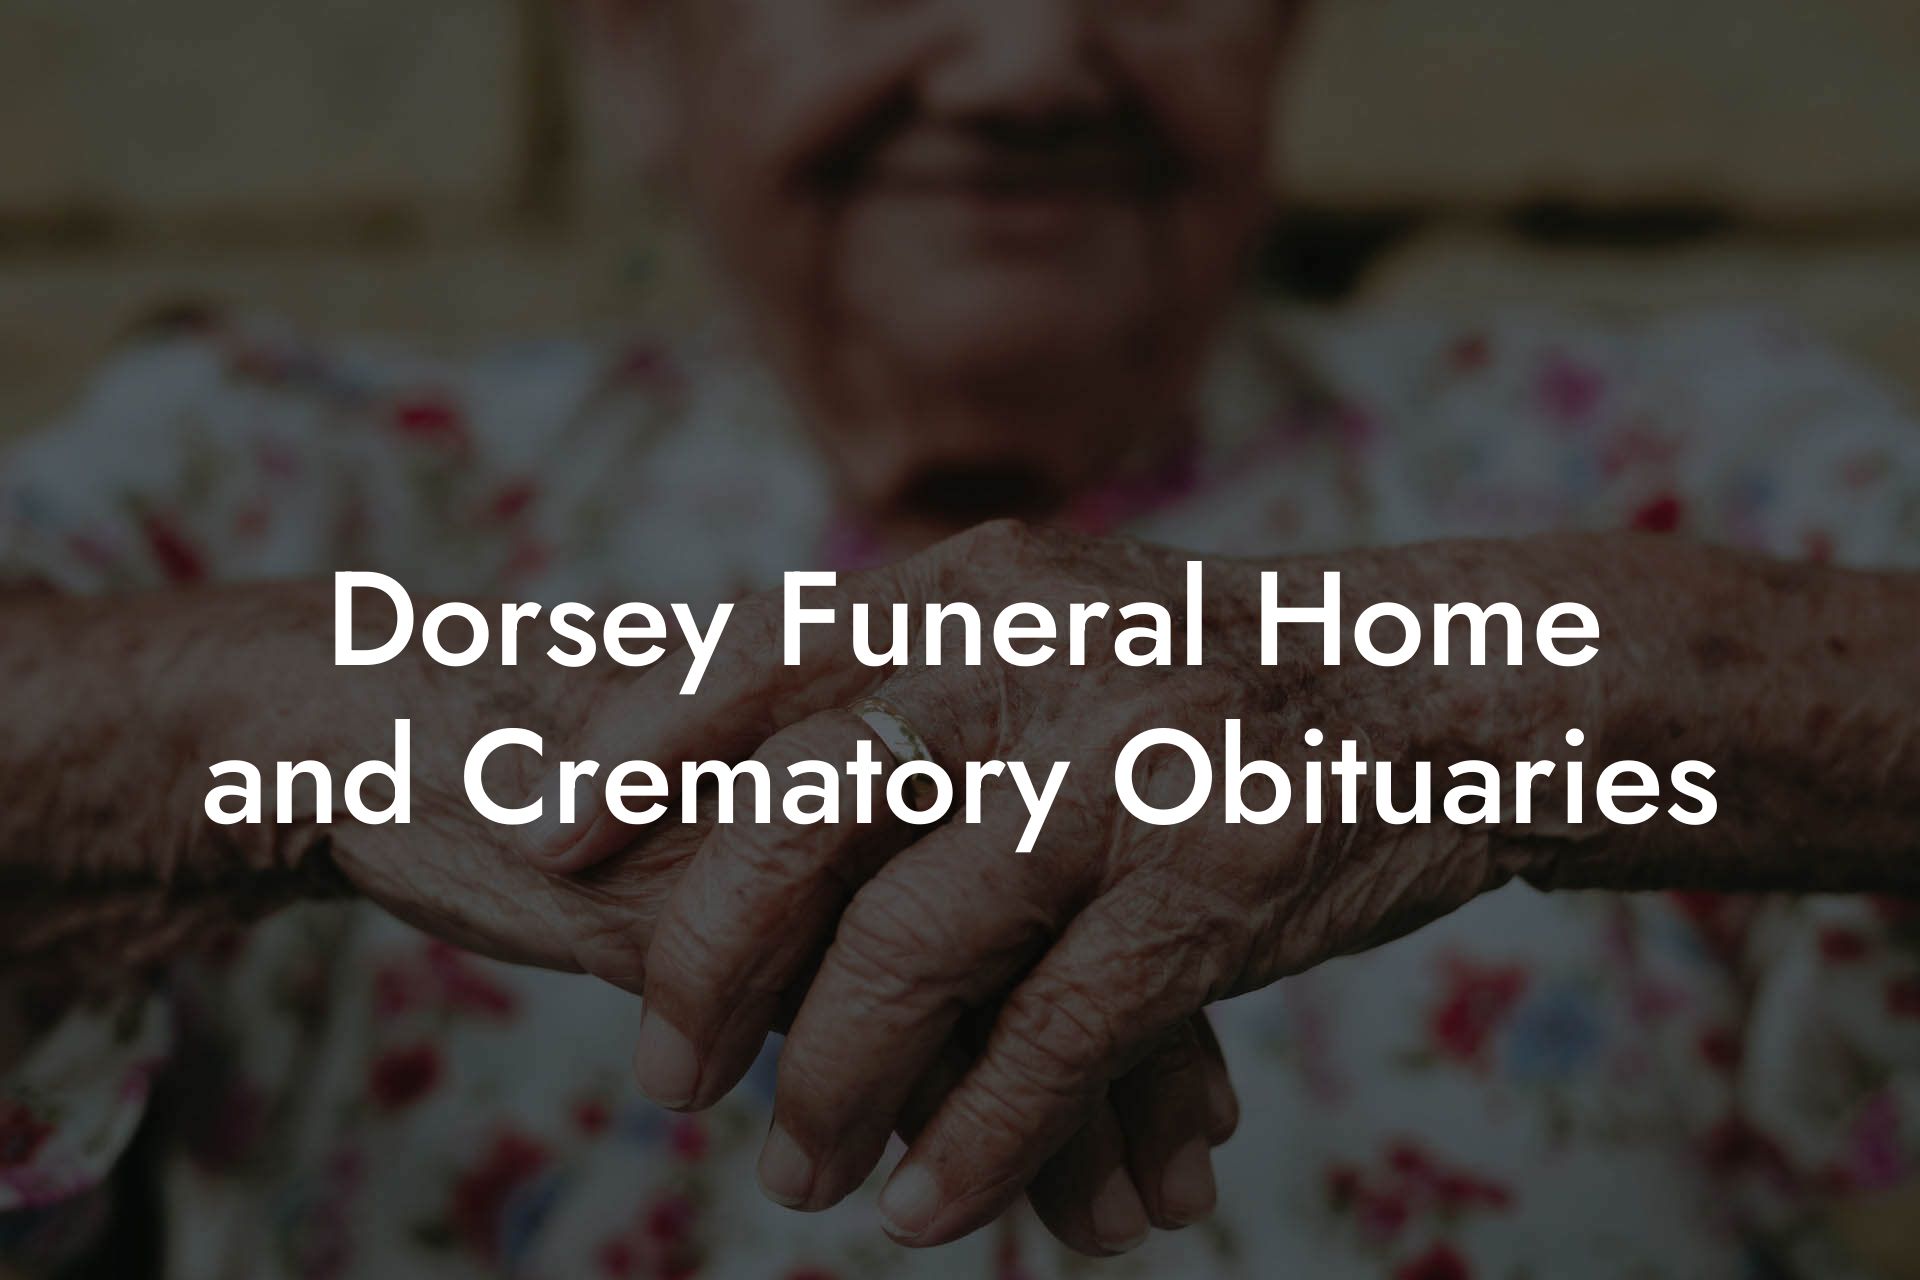 Dorsey Funeral Home and Crematory Obituaries